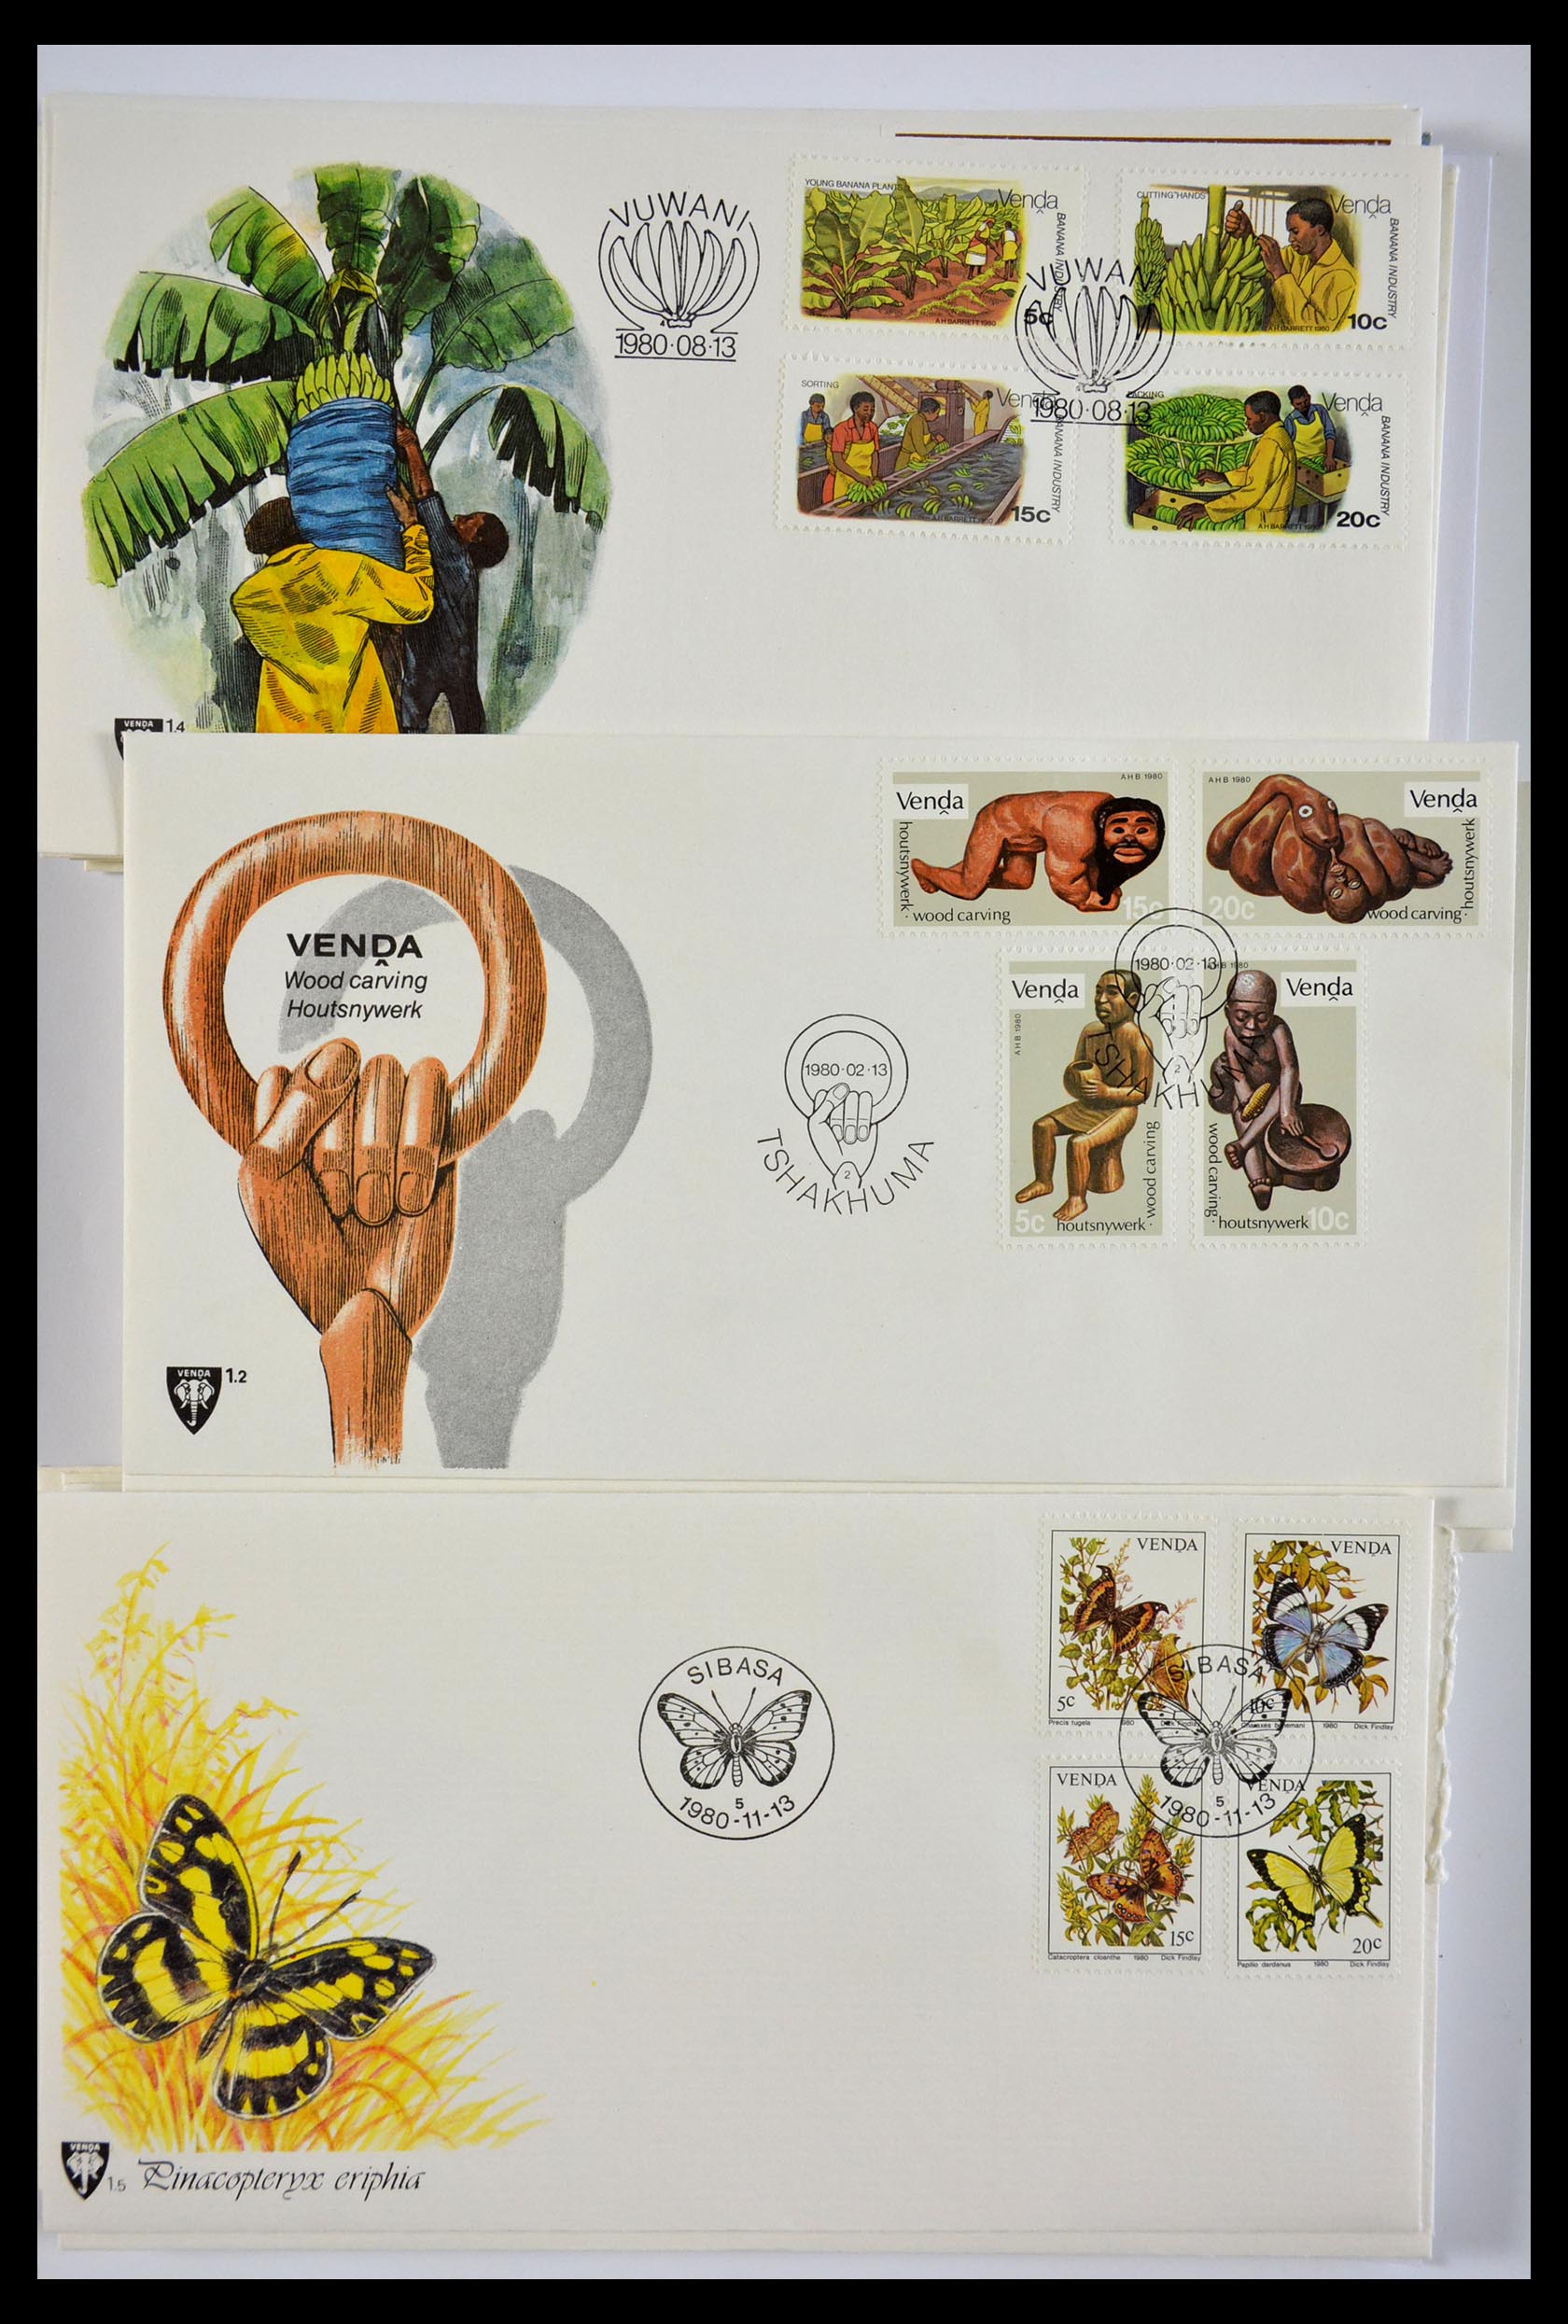 29356 582 - 29356 South Africa homelands first day covers 1979-1991.